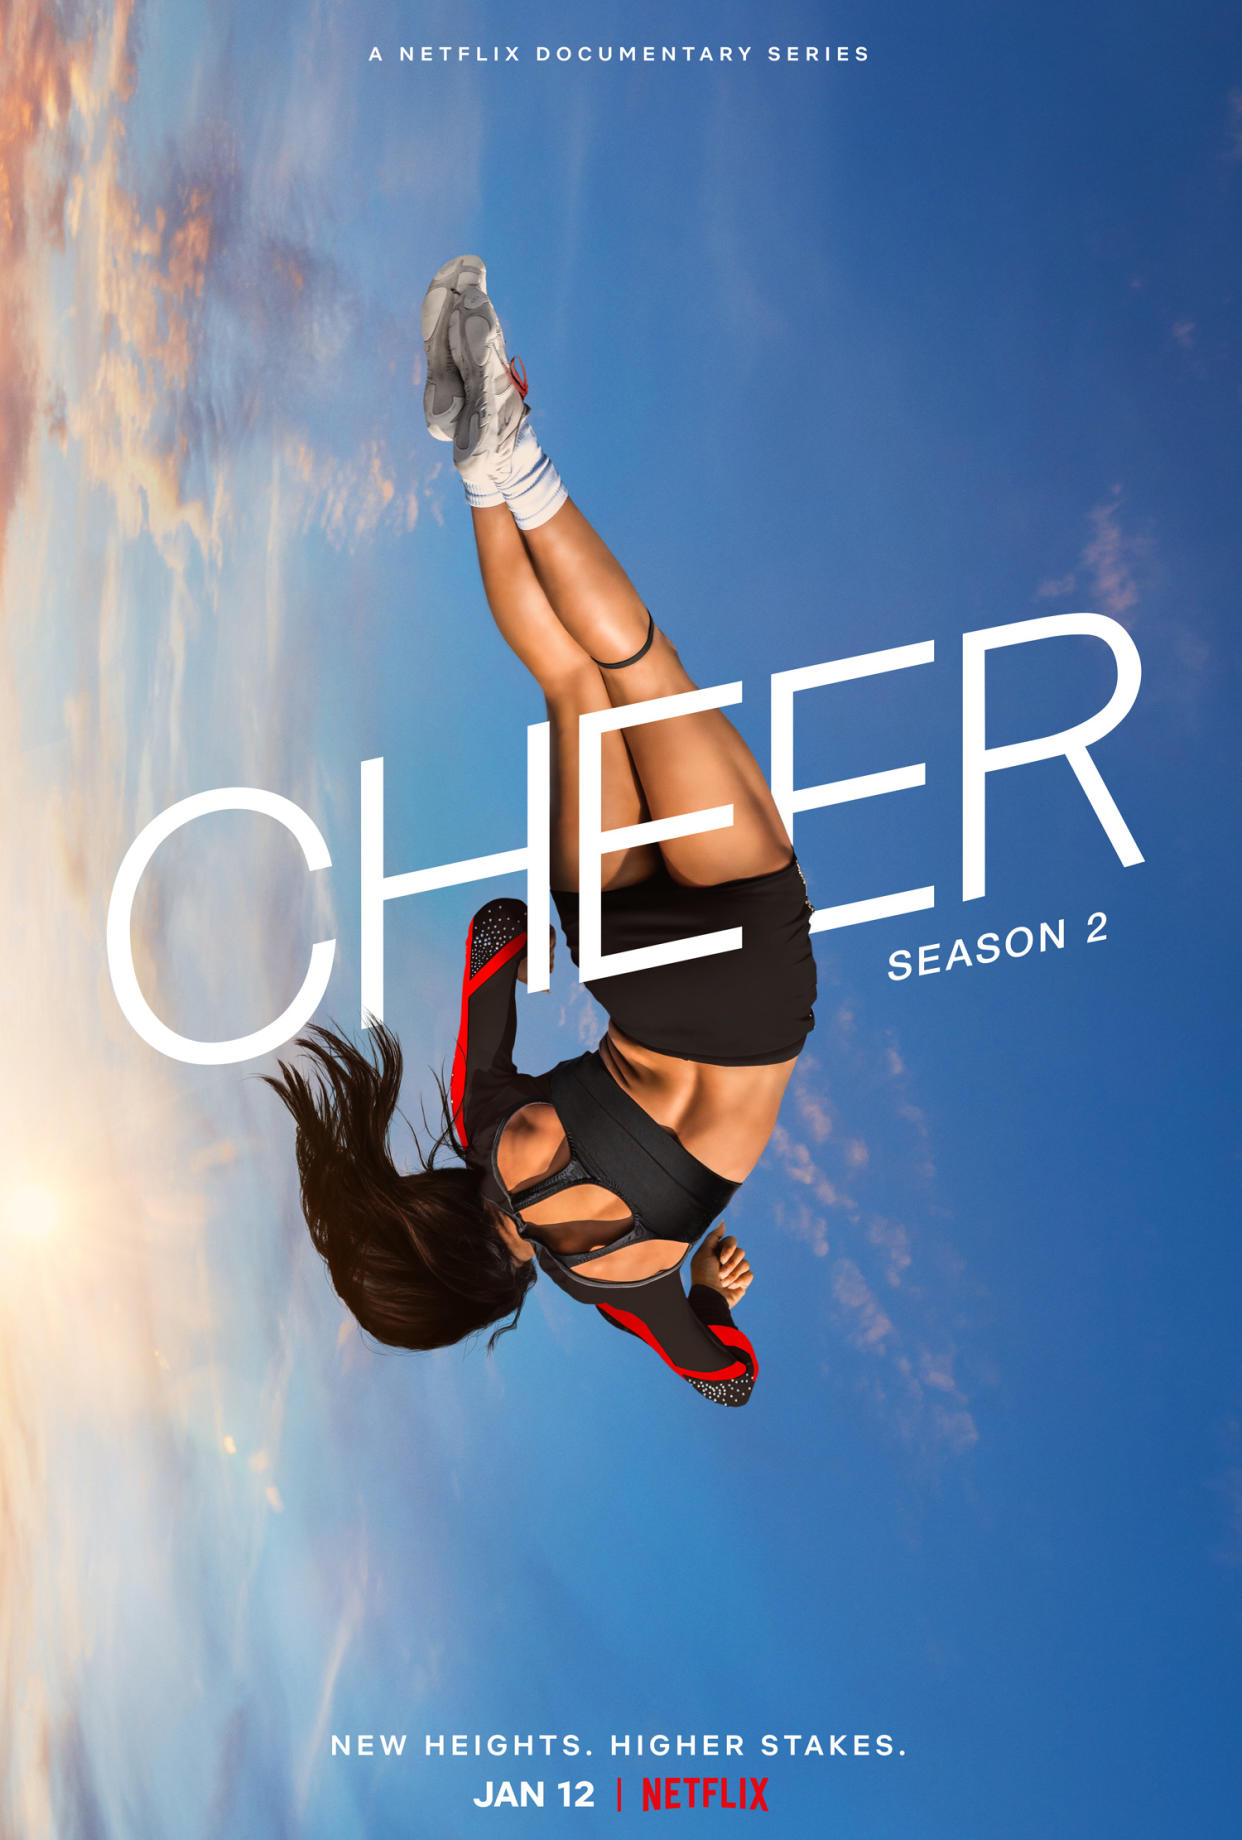 Harris was the breakout star of Cheer, which follows a cheerleading team from Navarro College in Corsicana, Texas, as it sought a national title (Netflix/PA)